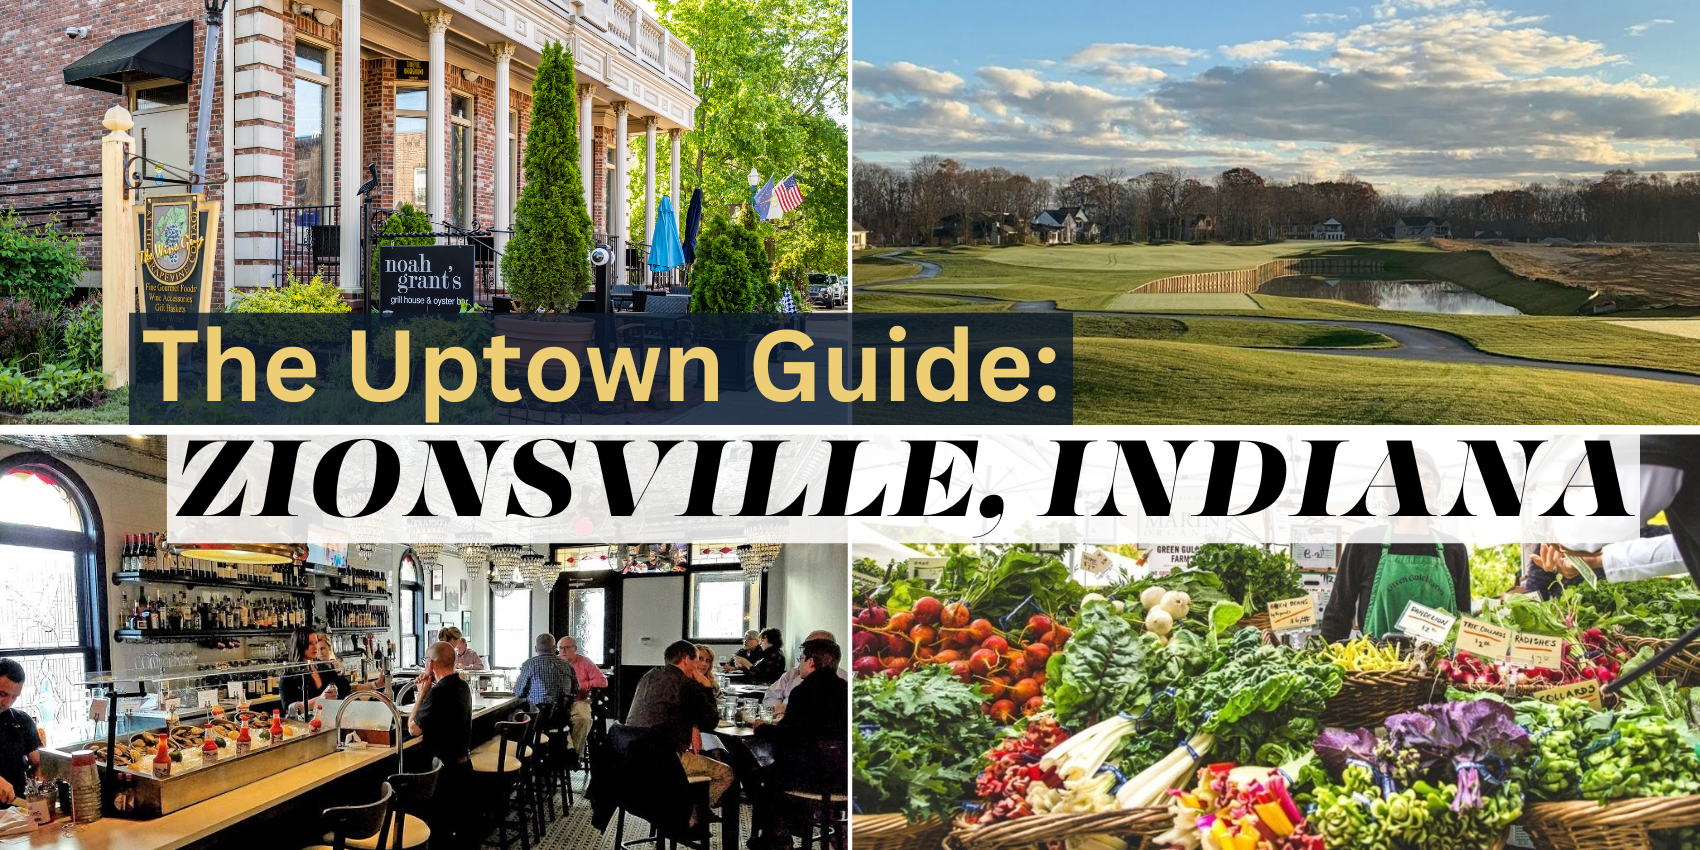 The Uptown Guide: Zionsville, Indiana